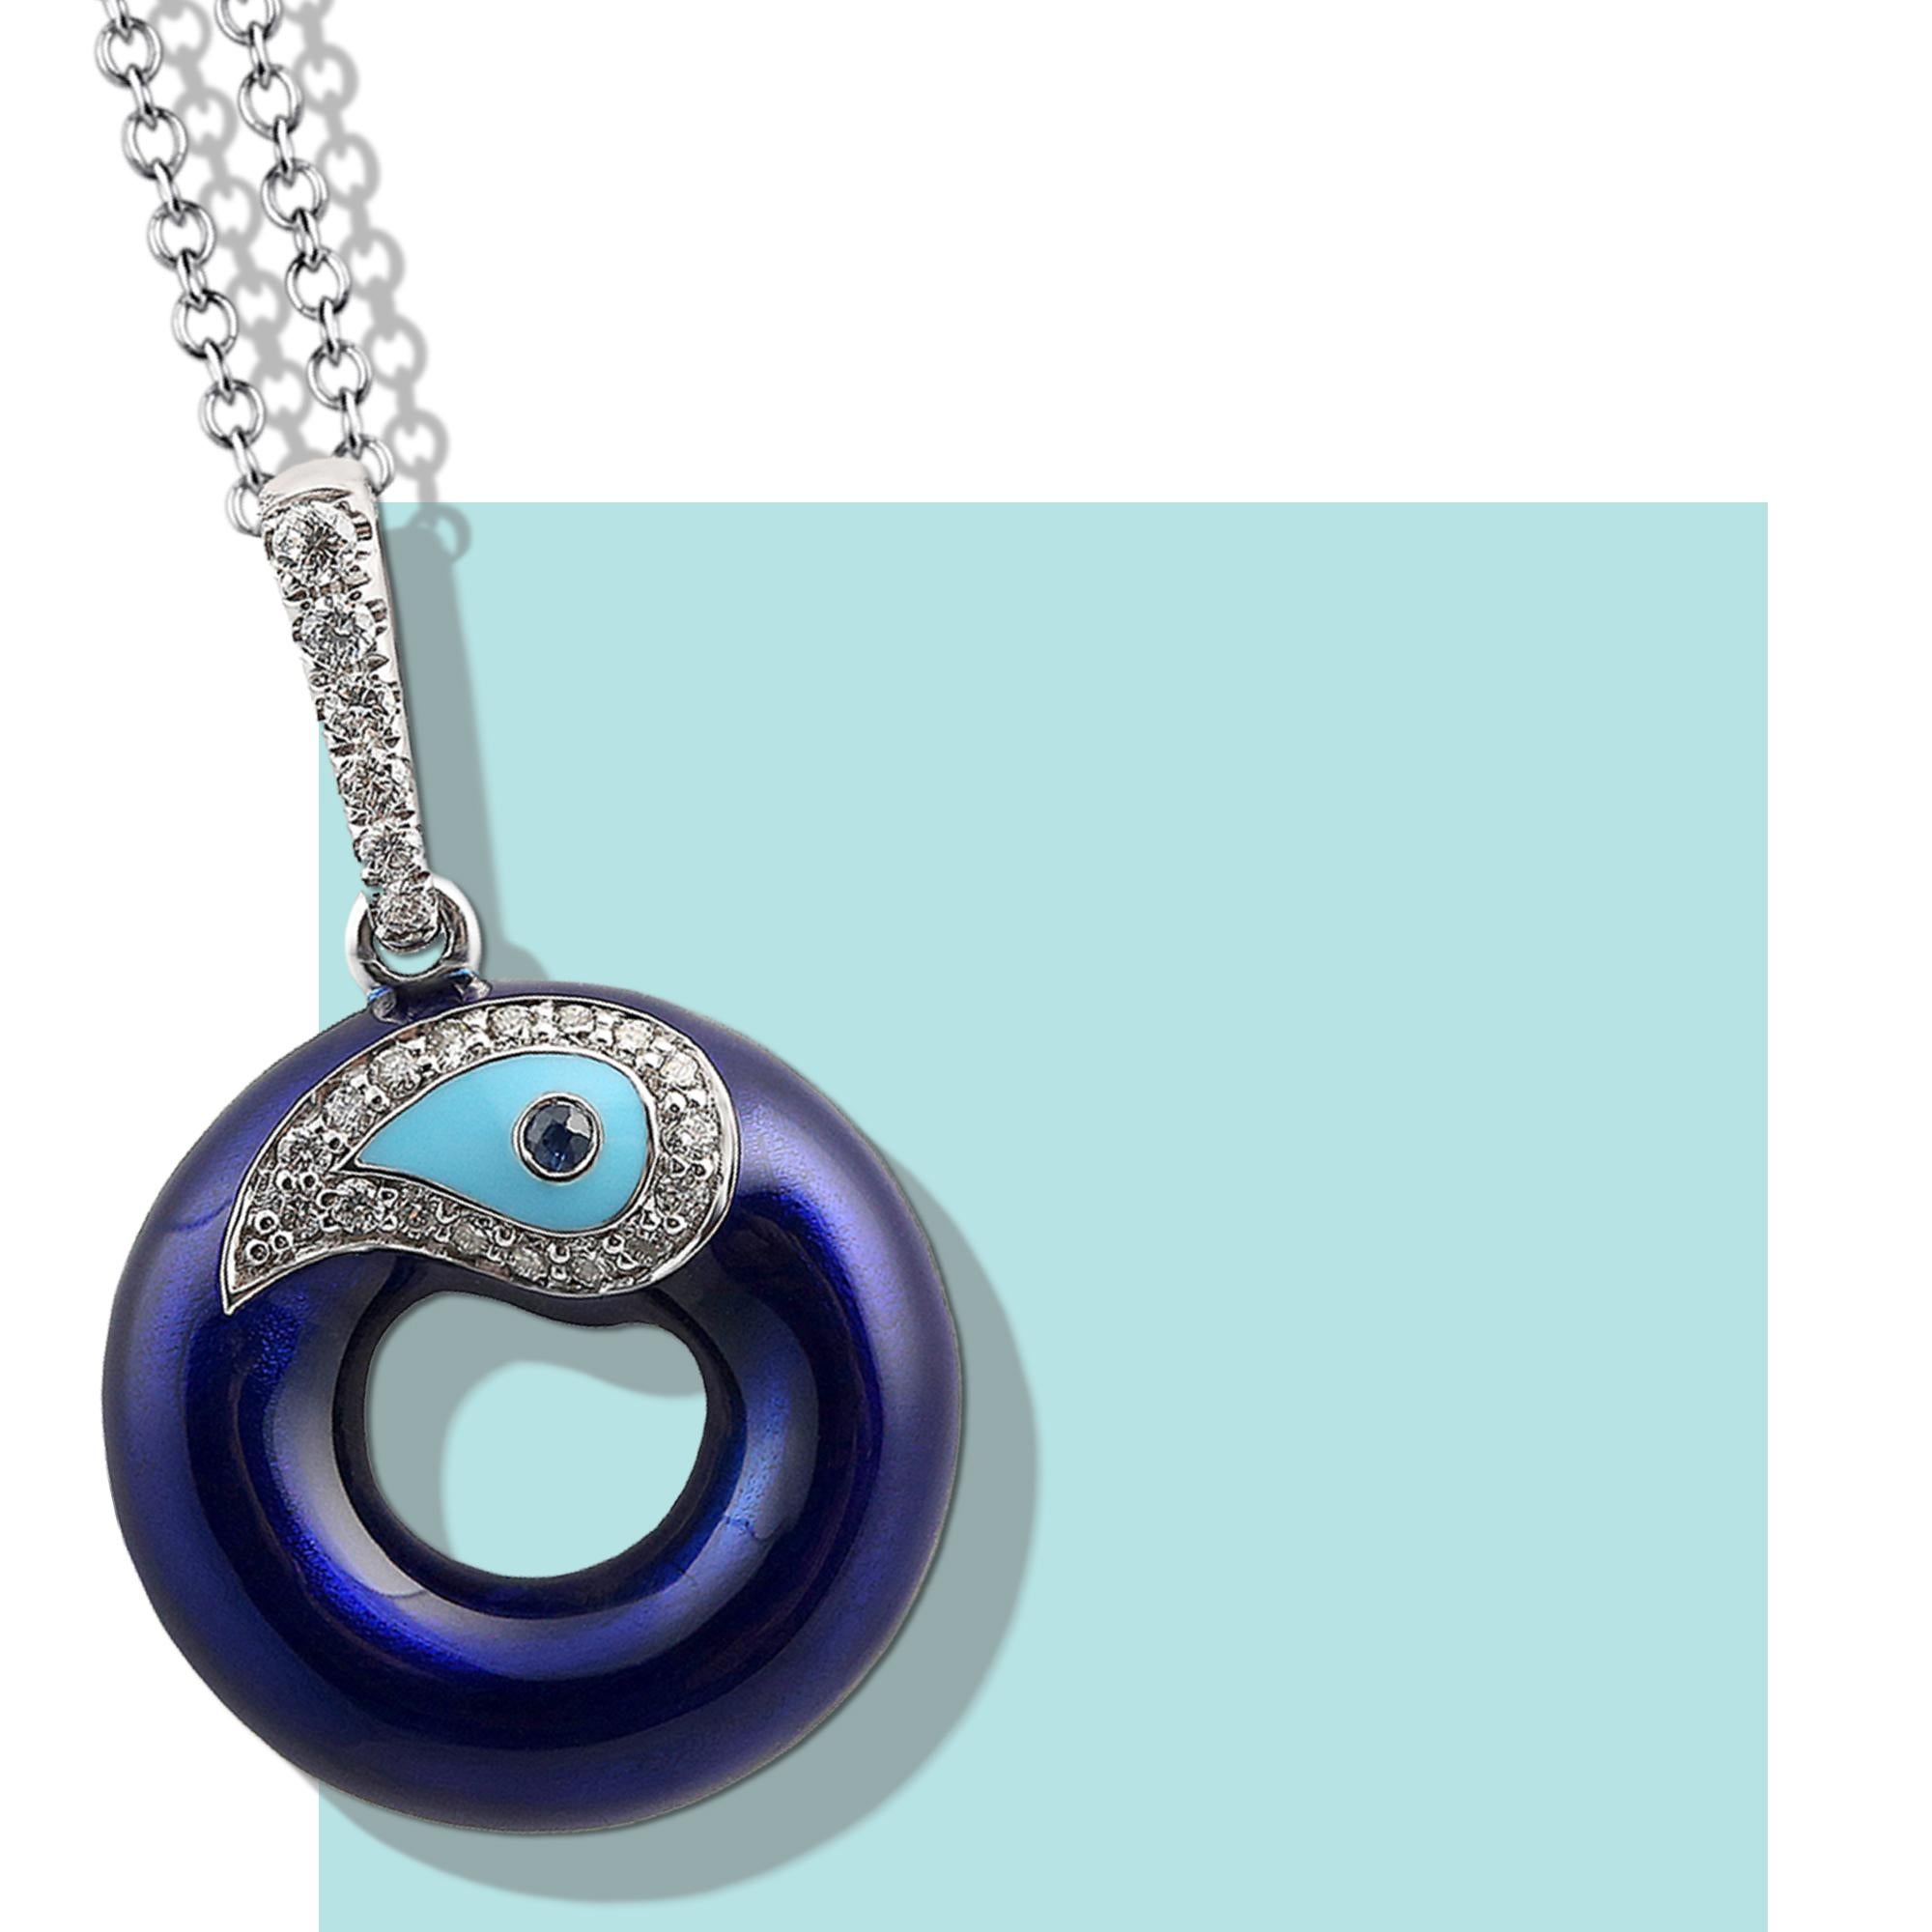 Nazarlique Evil Eye ID Pendant, Choose Your Letter Pendant Necklace And Tell Your Story.
Diamond O Initial of Evil Eye Charms Allows You To Create a Personalized Necklace By Adding Your Love Letters.

* 14K White Gold Enamel Initial ‘O’ Pendant
*